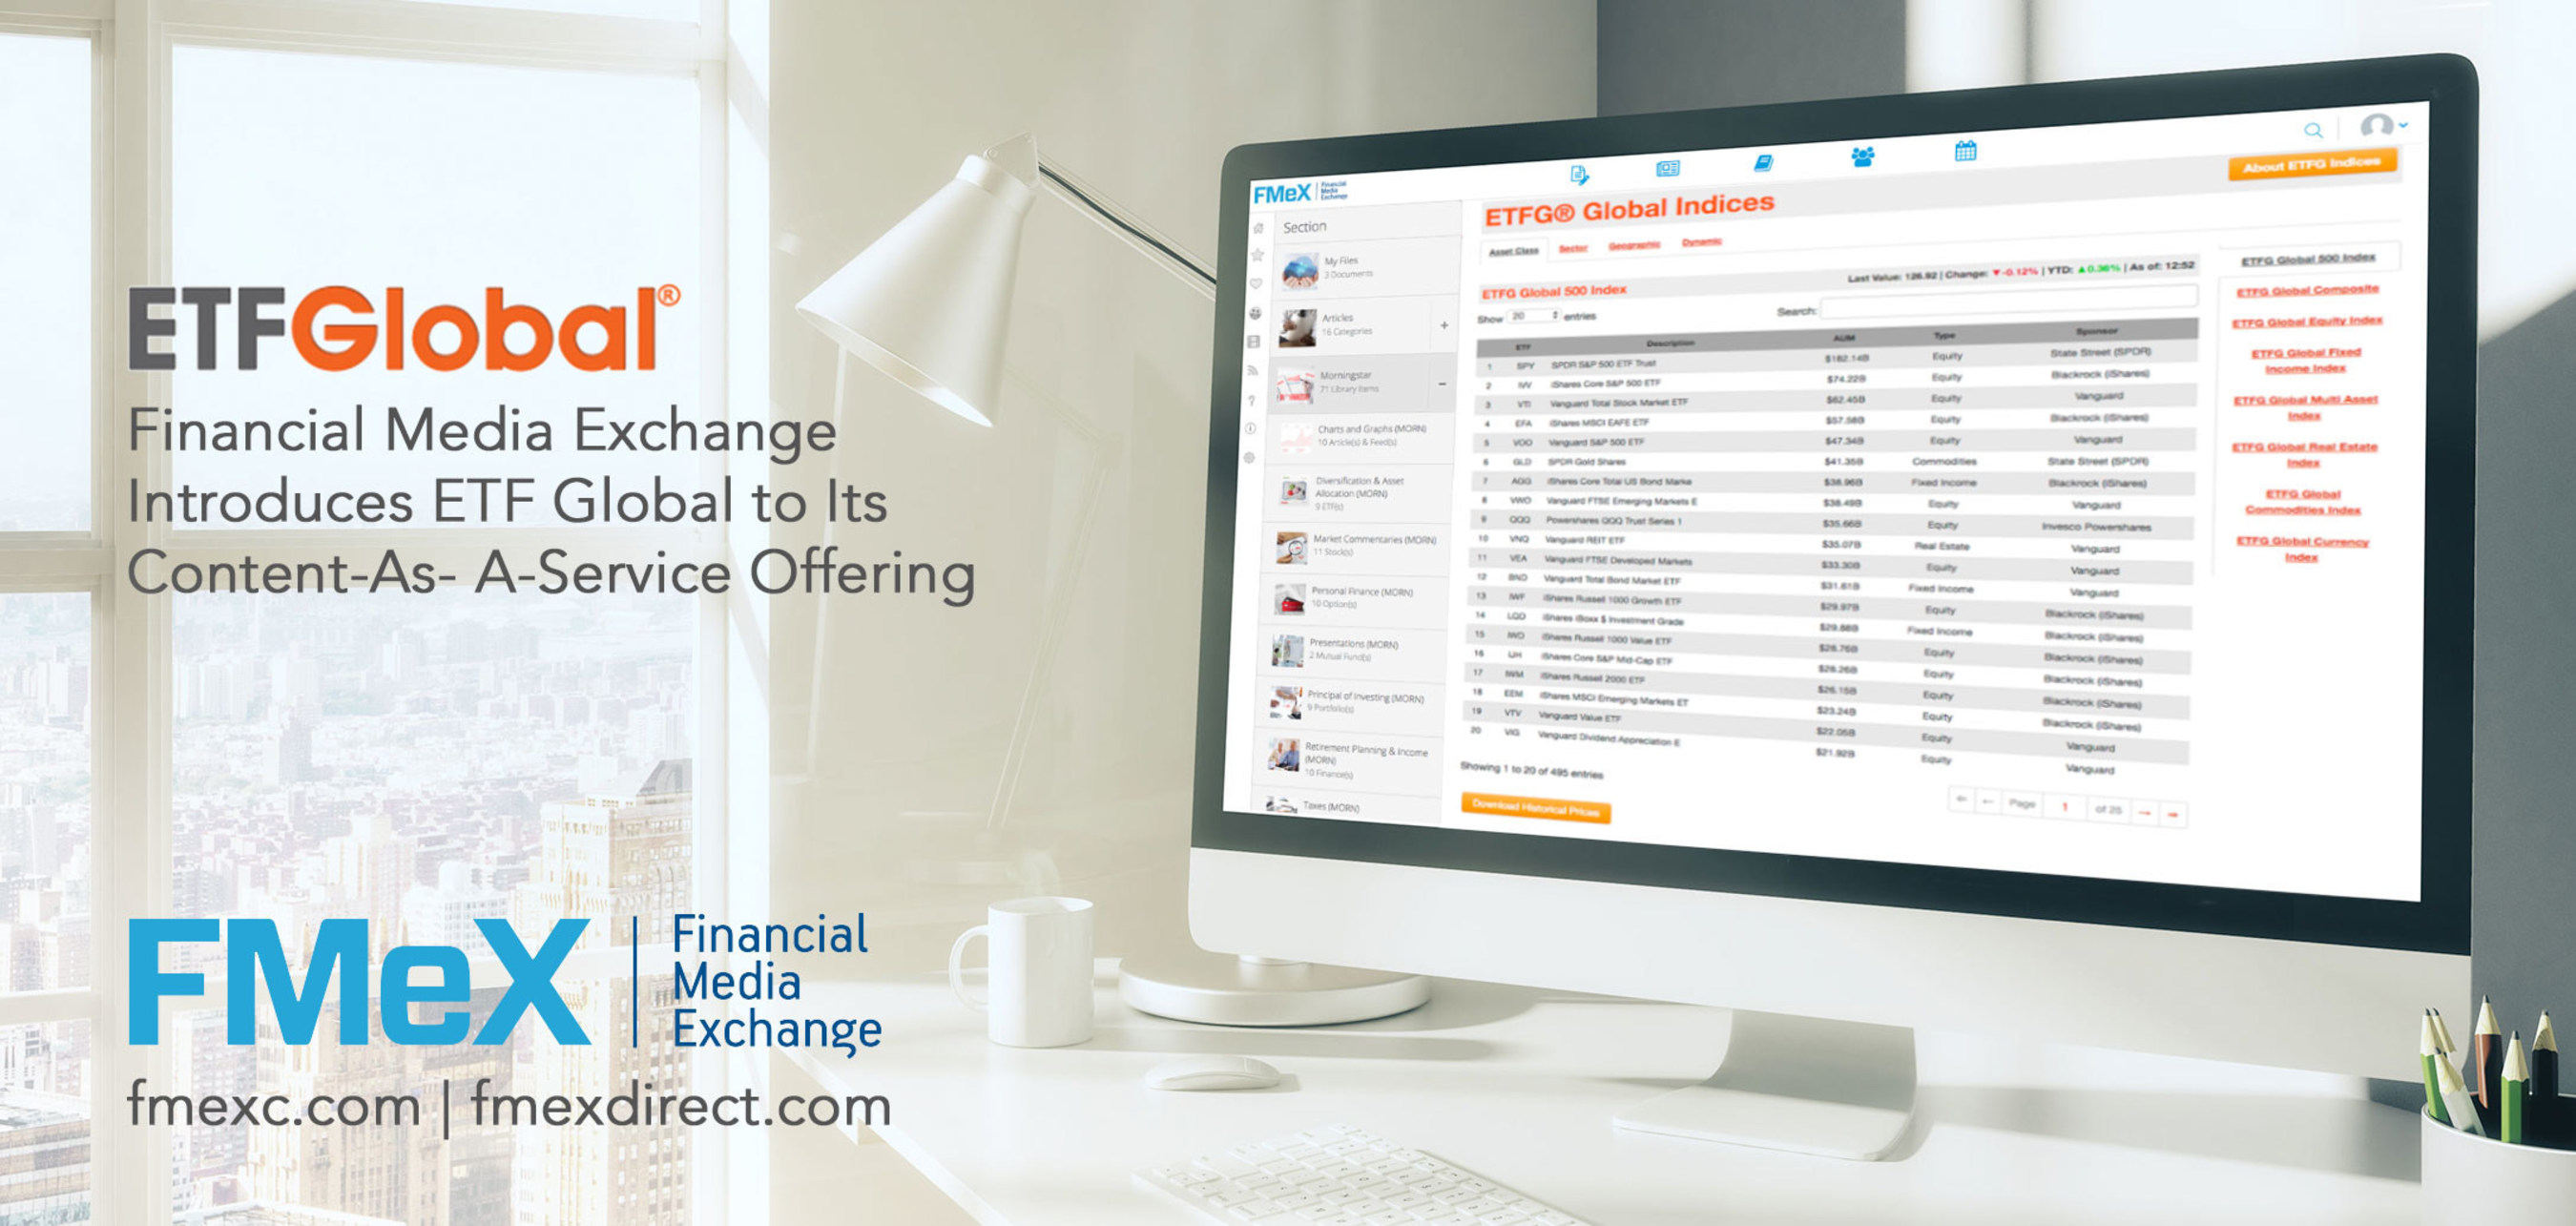 Financial Media Exchange ("FMeX"), the world's largest content library built exclusively for the financial services industry, announced today that it has added ETF Global's proprietary ETF ratings, analytics and educational offerings for Exchange-Traded-Products to its platform - thereby allowing users to access ETF Global's robust research that focuses on today's most relevant investment product, concepts and strategies.